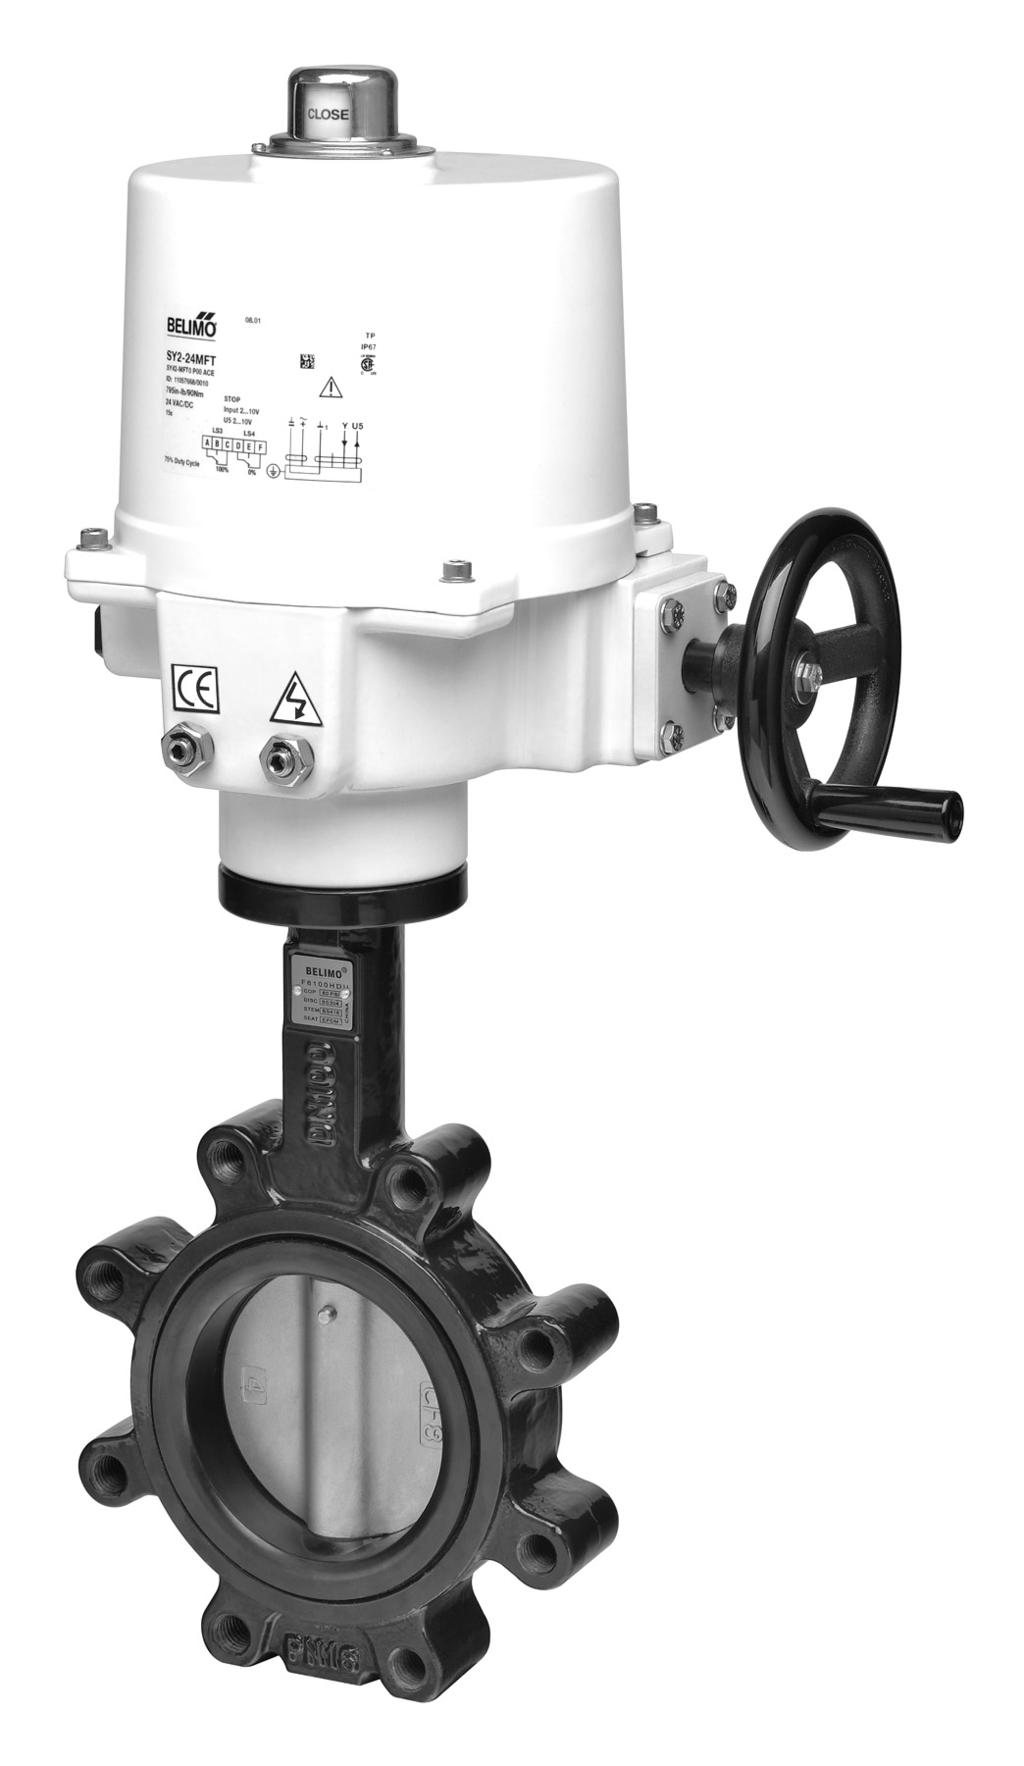 Features / enefits utterfly Valves H(U) Series Valves HV Service utterfly Valves 2-way and 3-way ssemblies elimo resilient seat H(U).